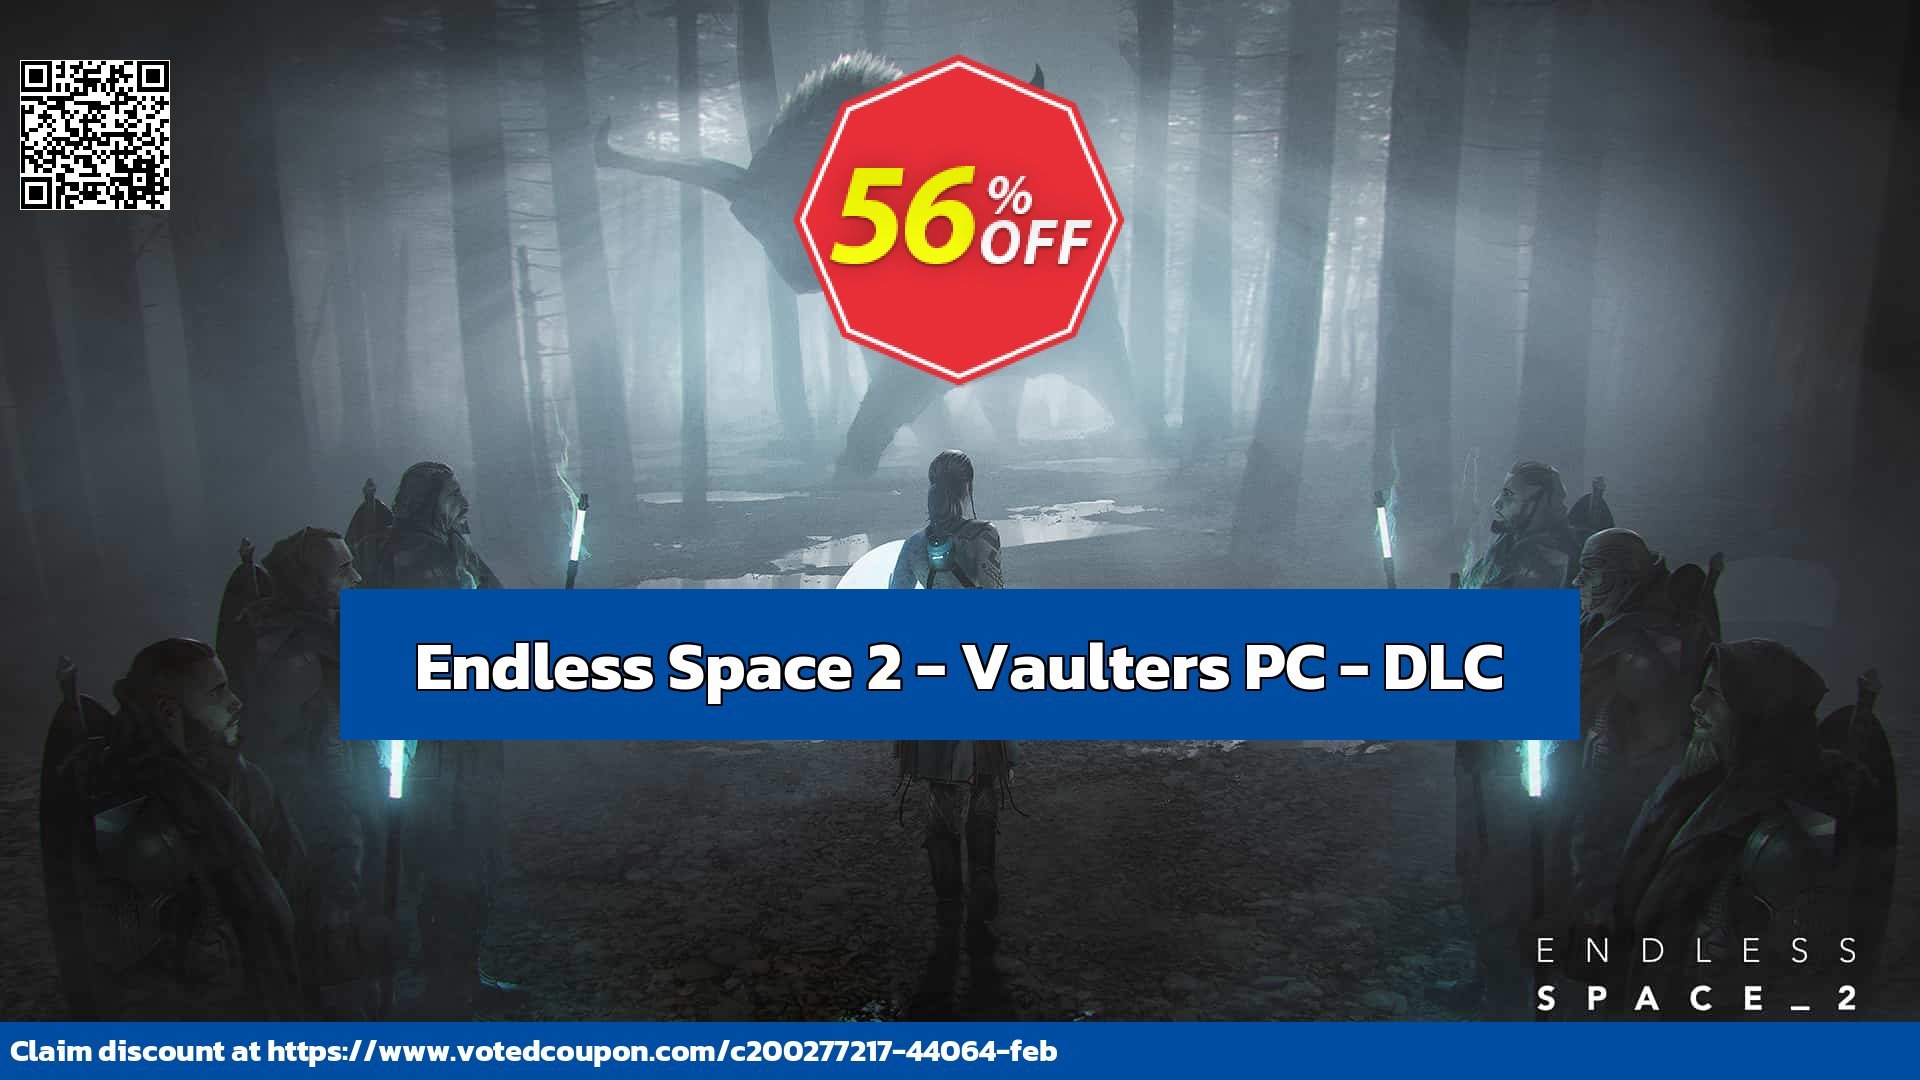 Endless Space 2 - Vaulters PC - DLC Coupon Code May 2024, 63% OFF - VotedCoupon